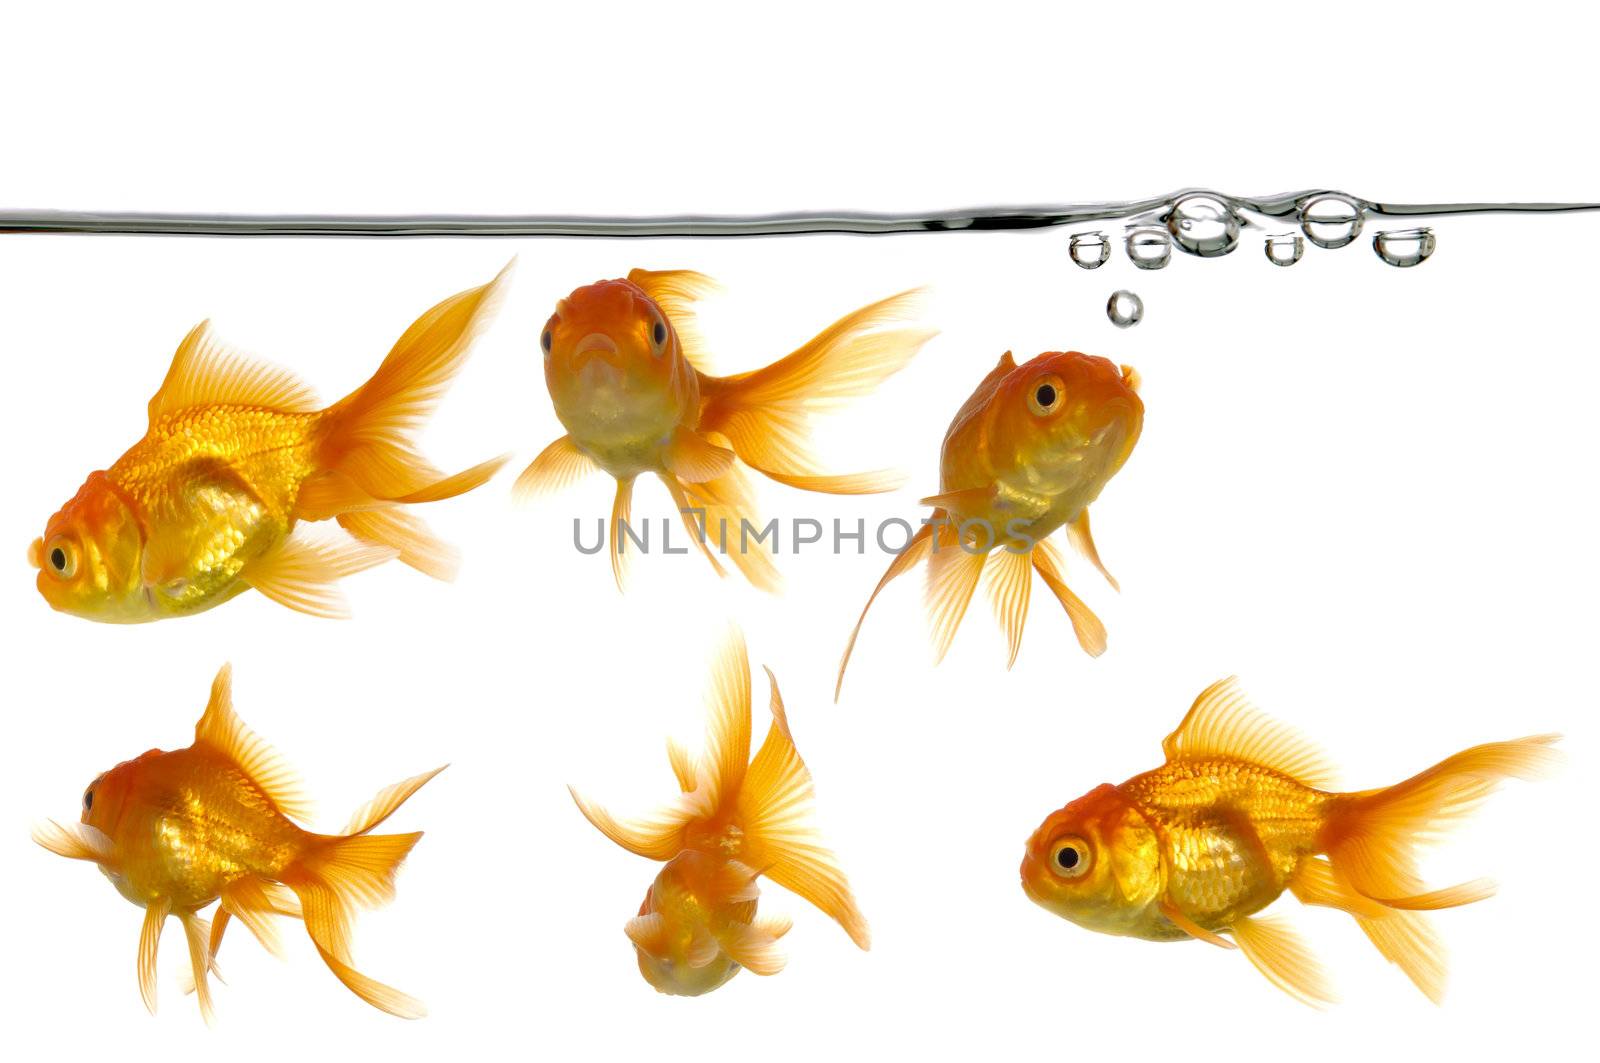 Waterline with small air bubbles and gold fish